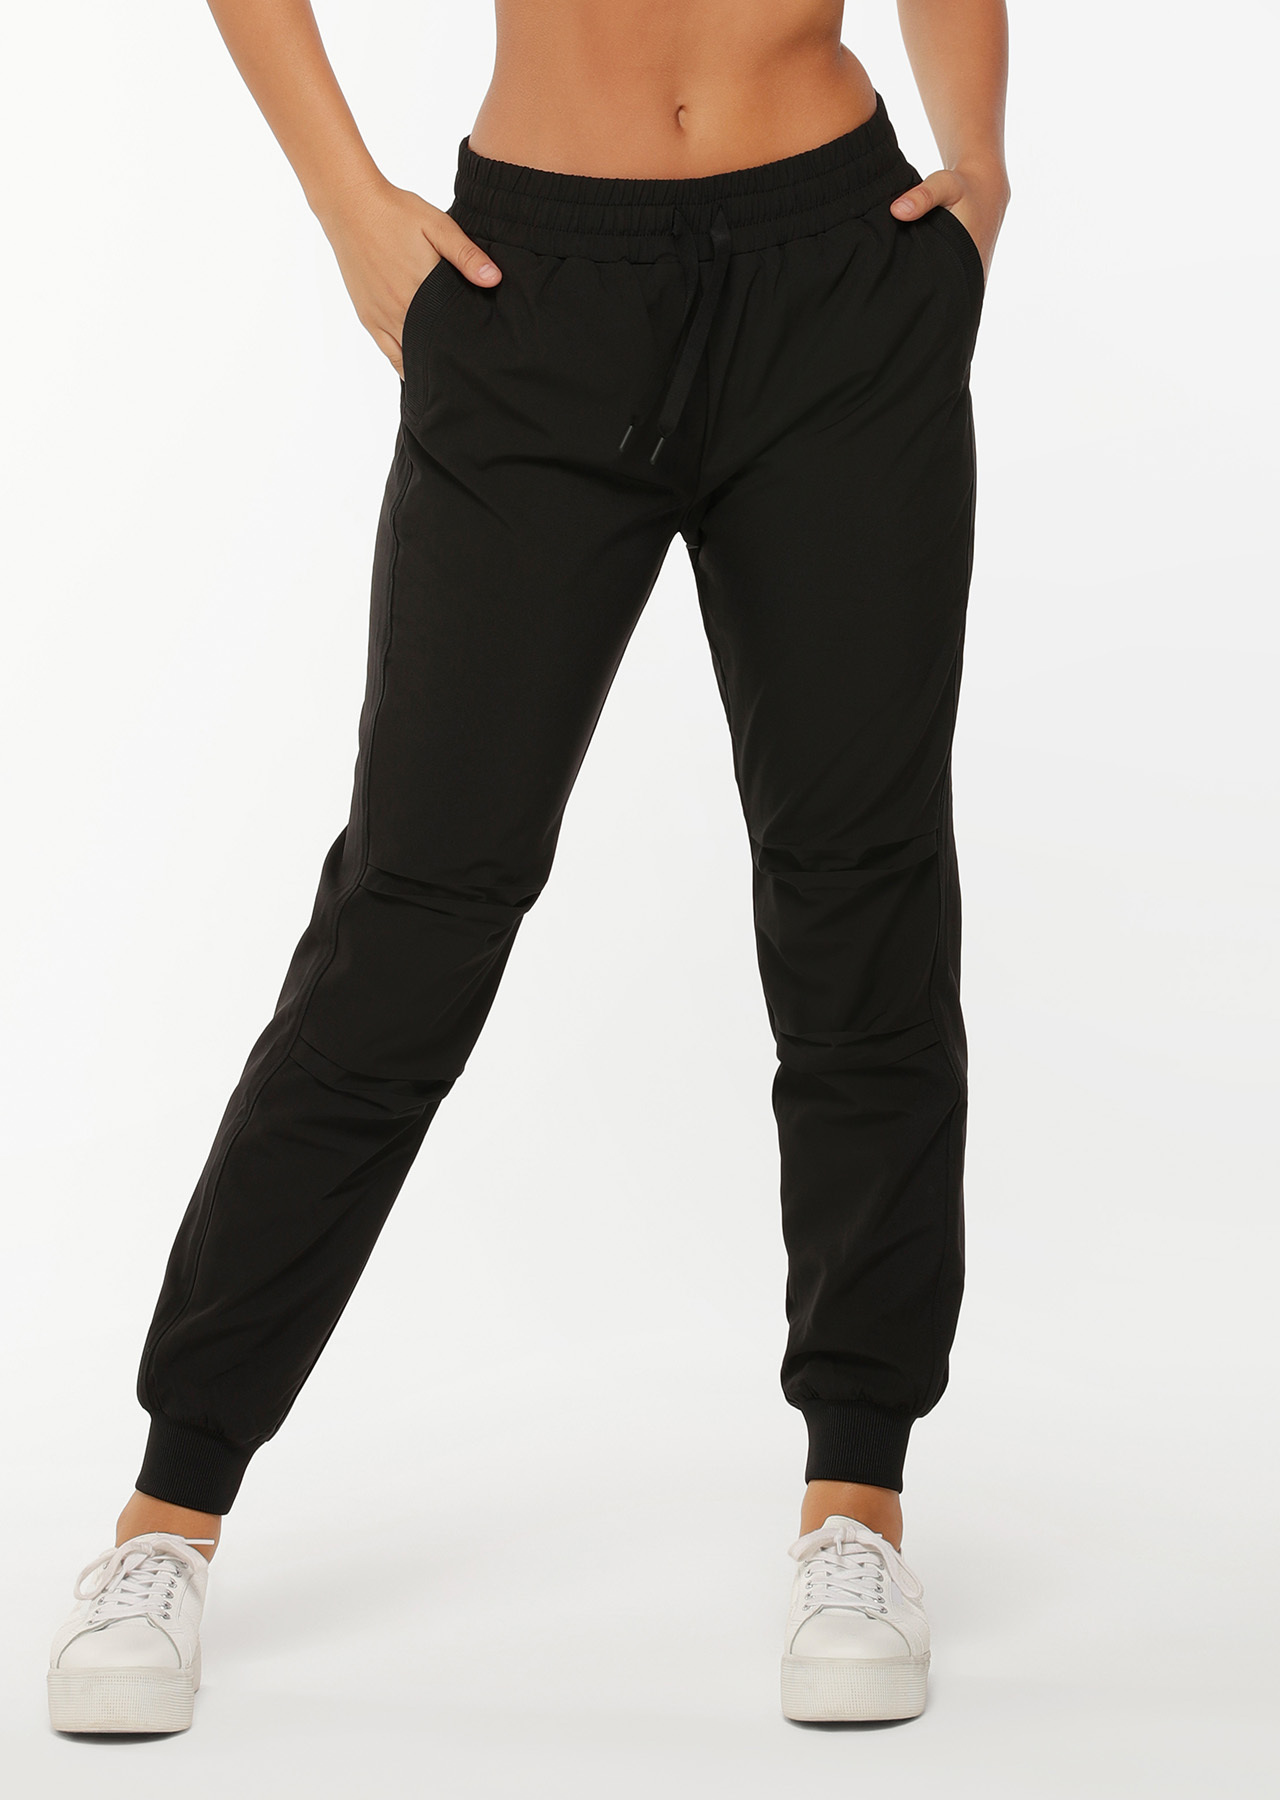 Innerwin Lounge Pant Solid Color Women Trousers Warm Winter